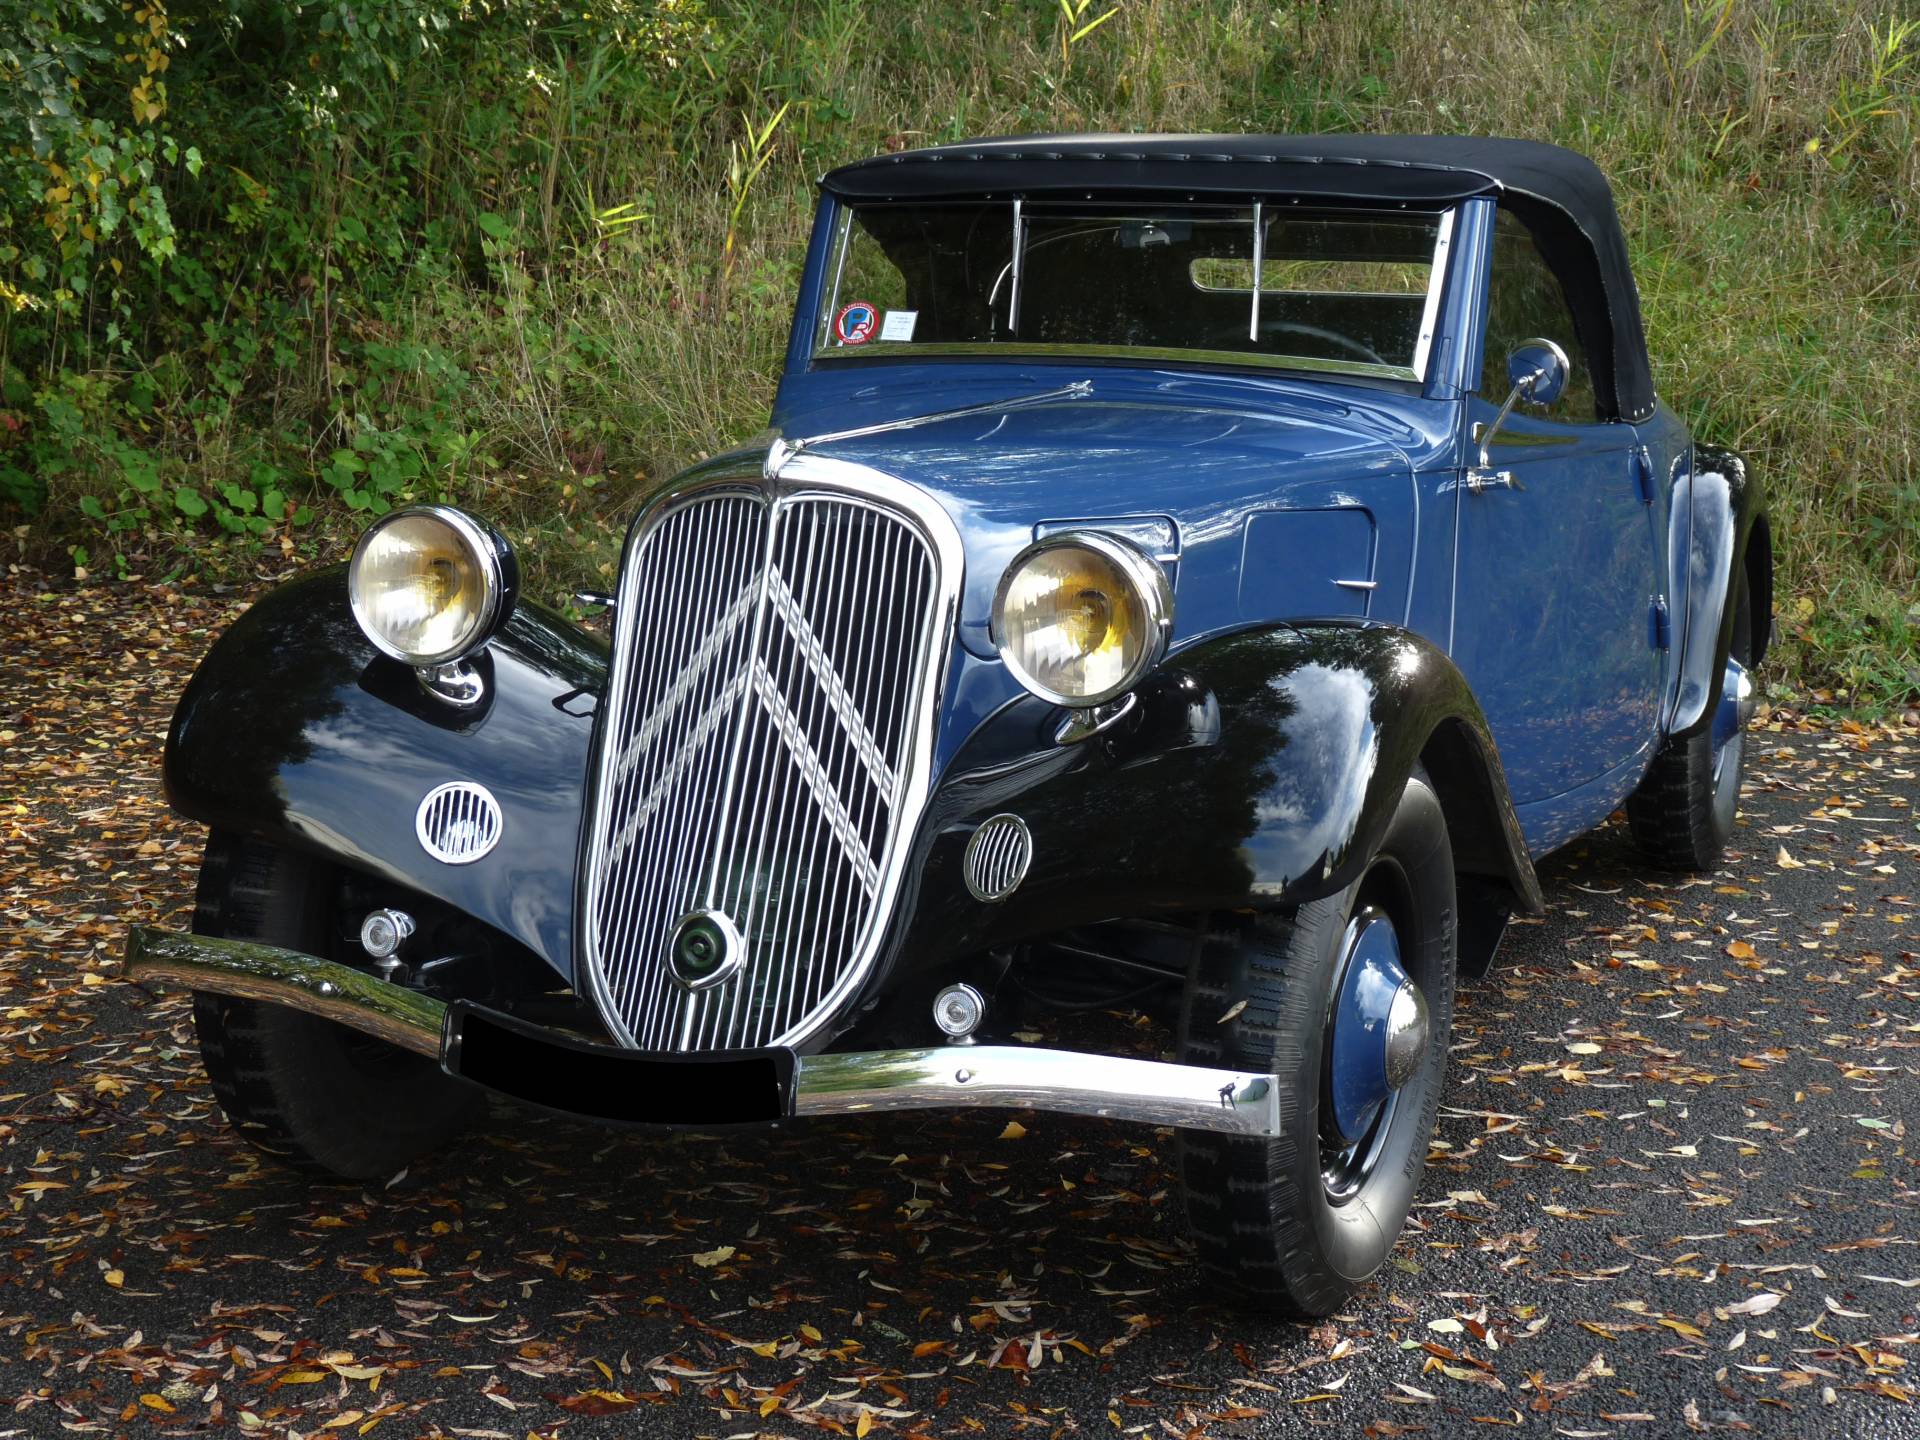 Citroën Traction Avant Classic Cars for Sale - Classic Trader